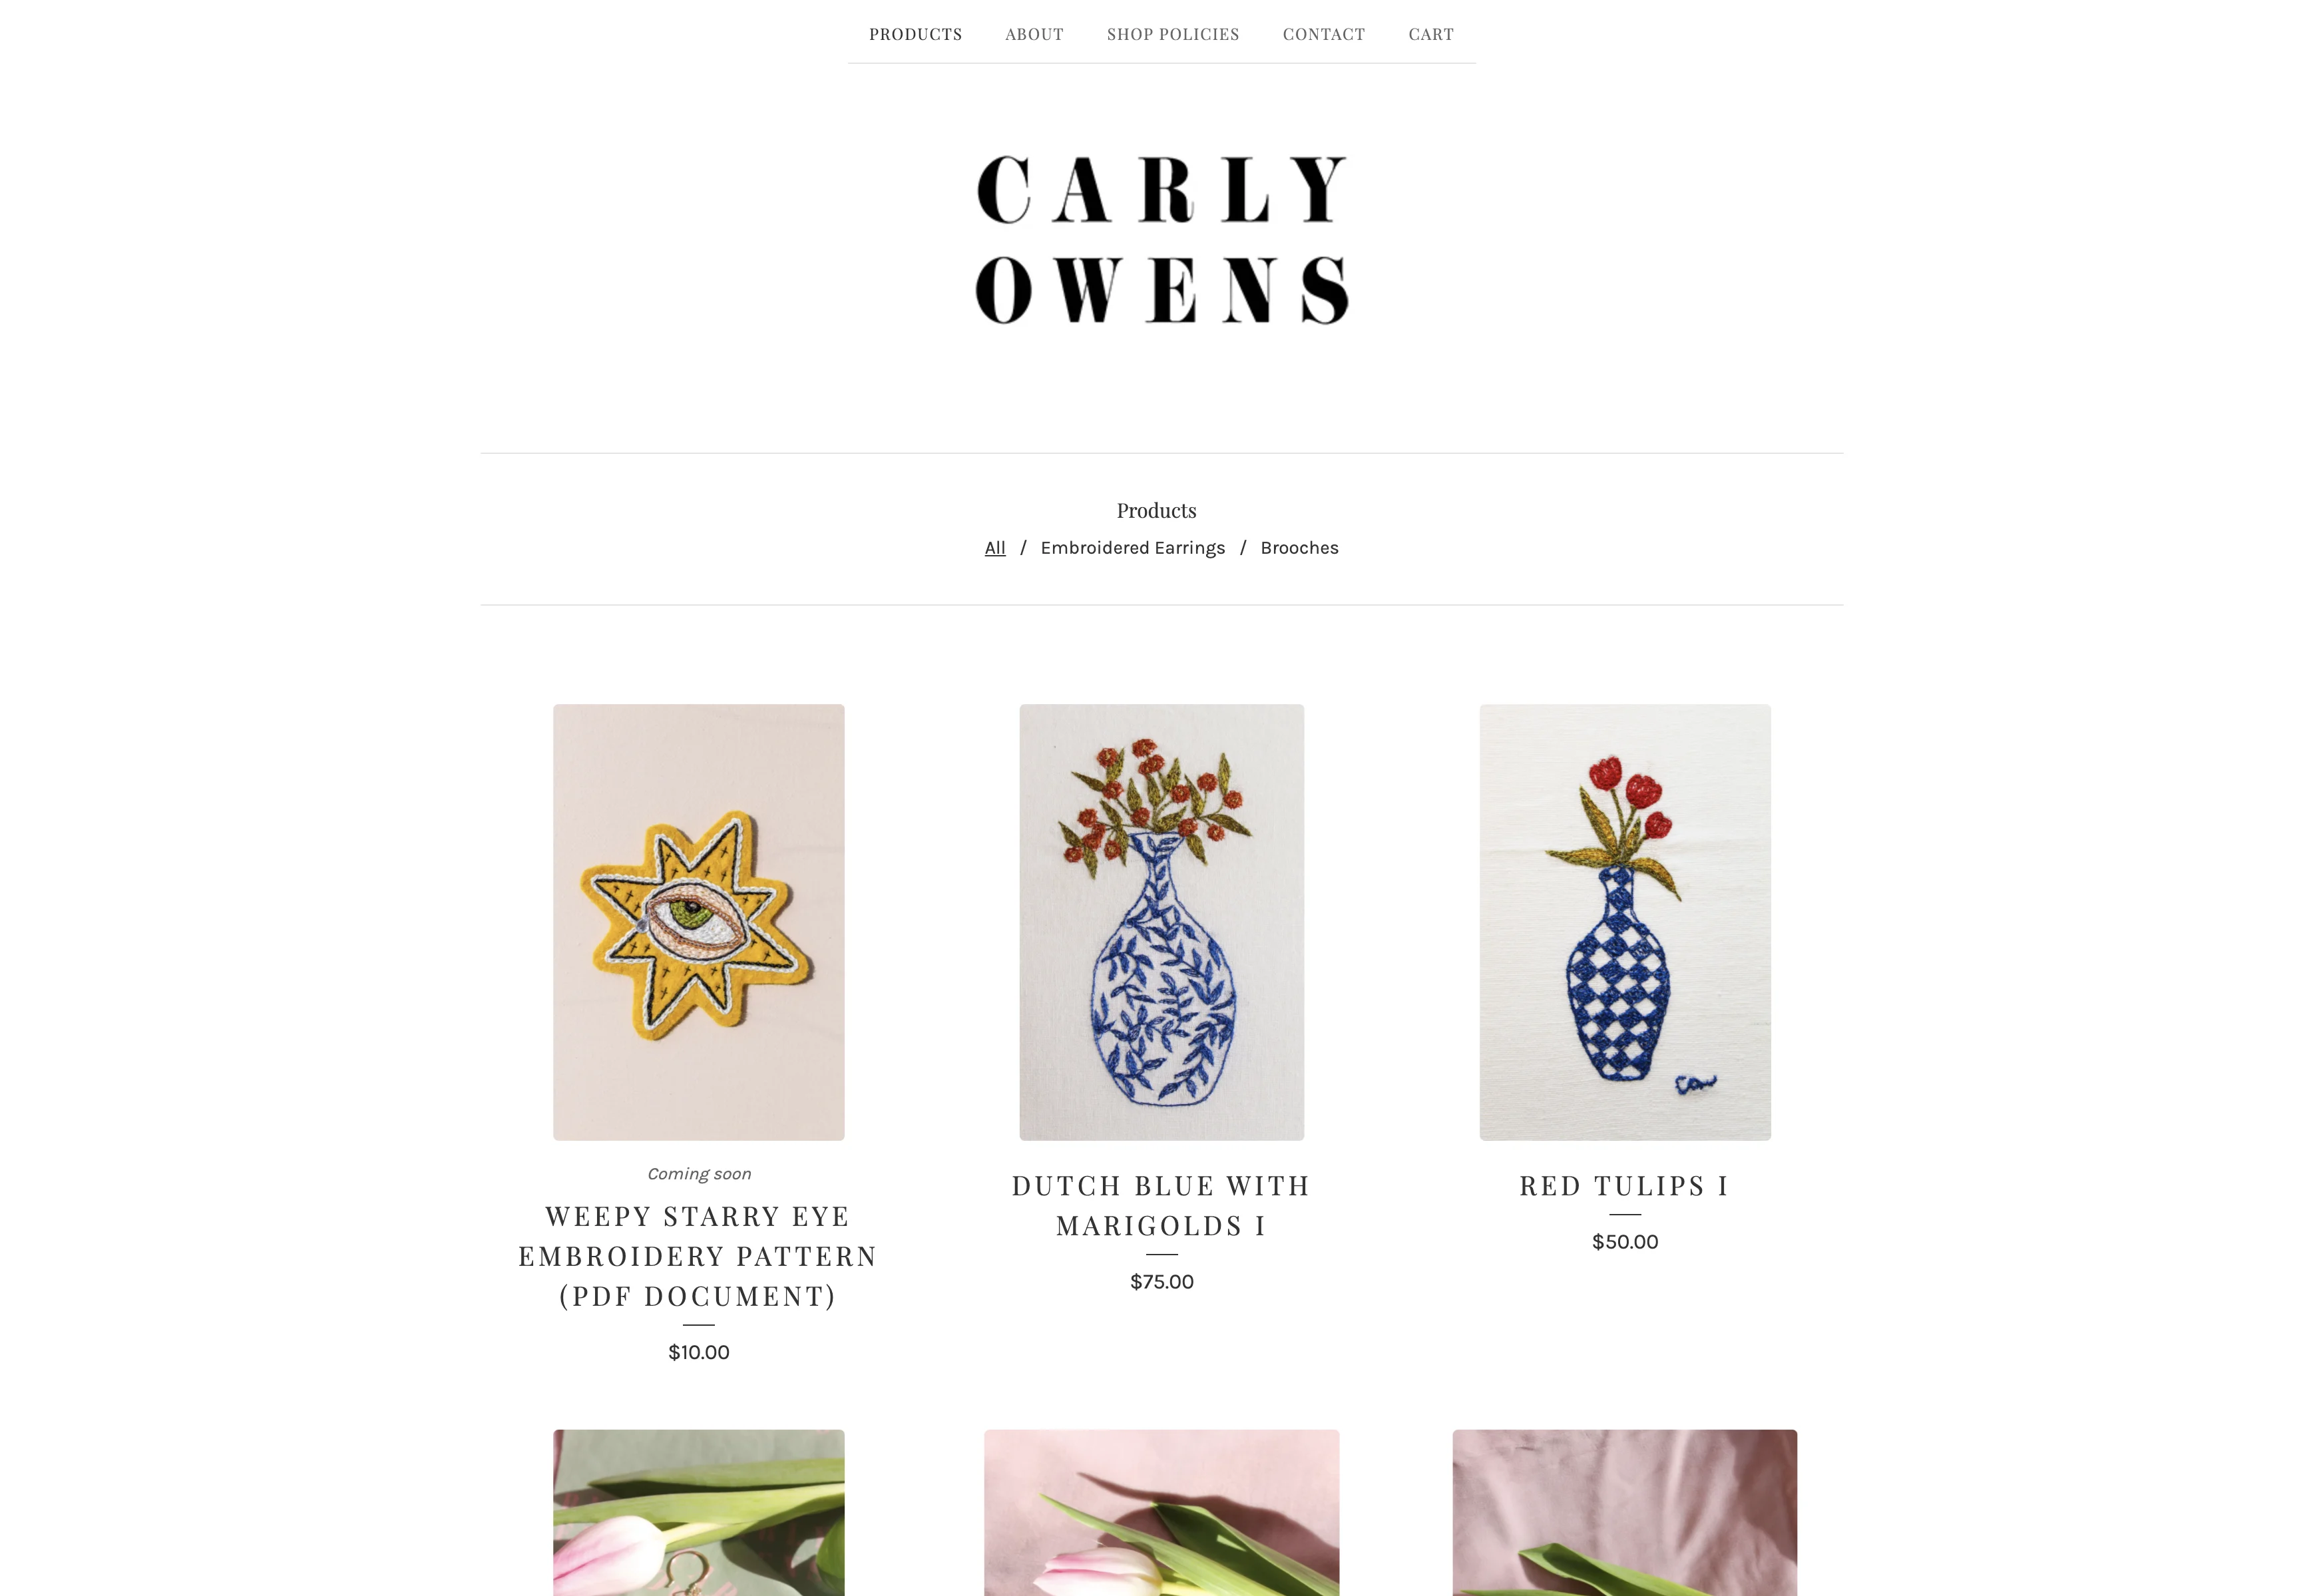 CarlyOwens_Store2.png